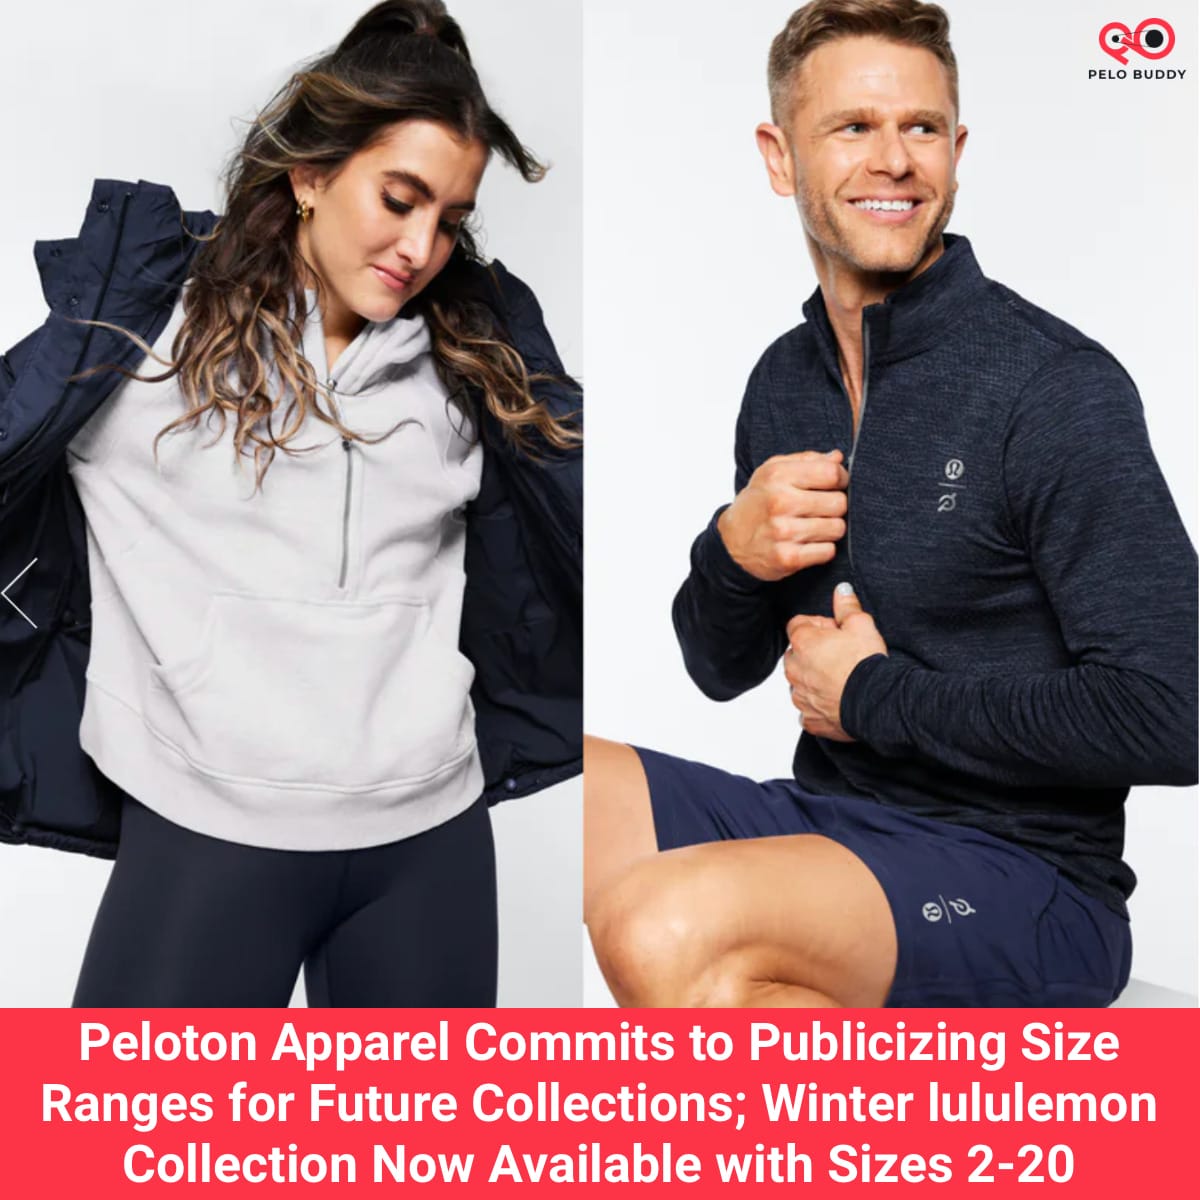 Peloton Apparel Commits to Publicizing Size Ranges for Future Collections;  Winter lululemon Collection Now Available with Sizes 2-20 - Peloton Buddy